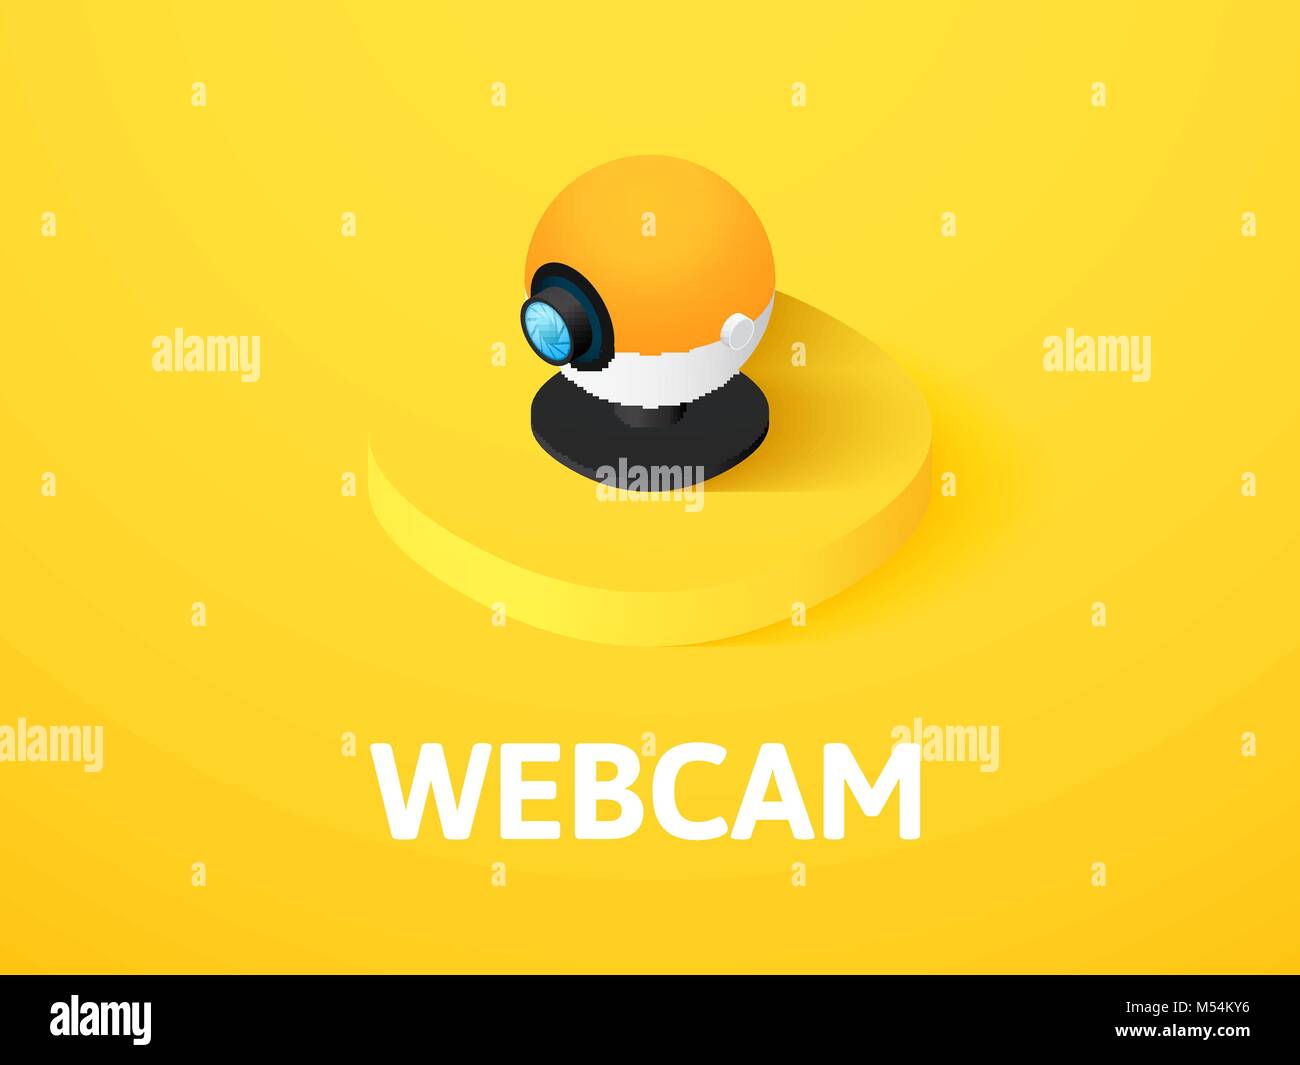 Webcam isometric icon, isolated on color background Stock Vector